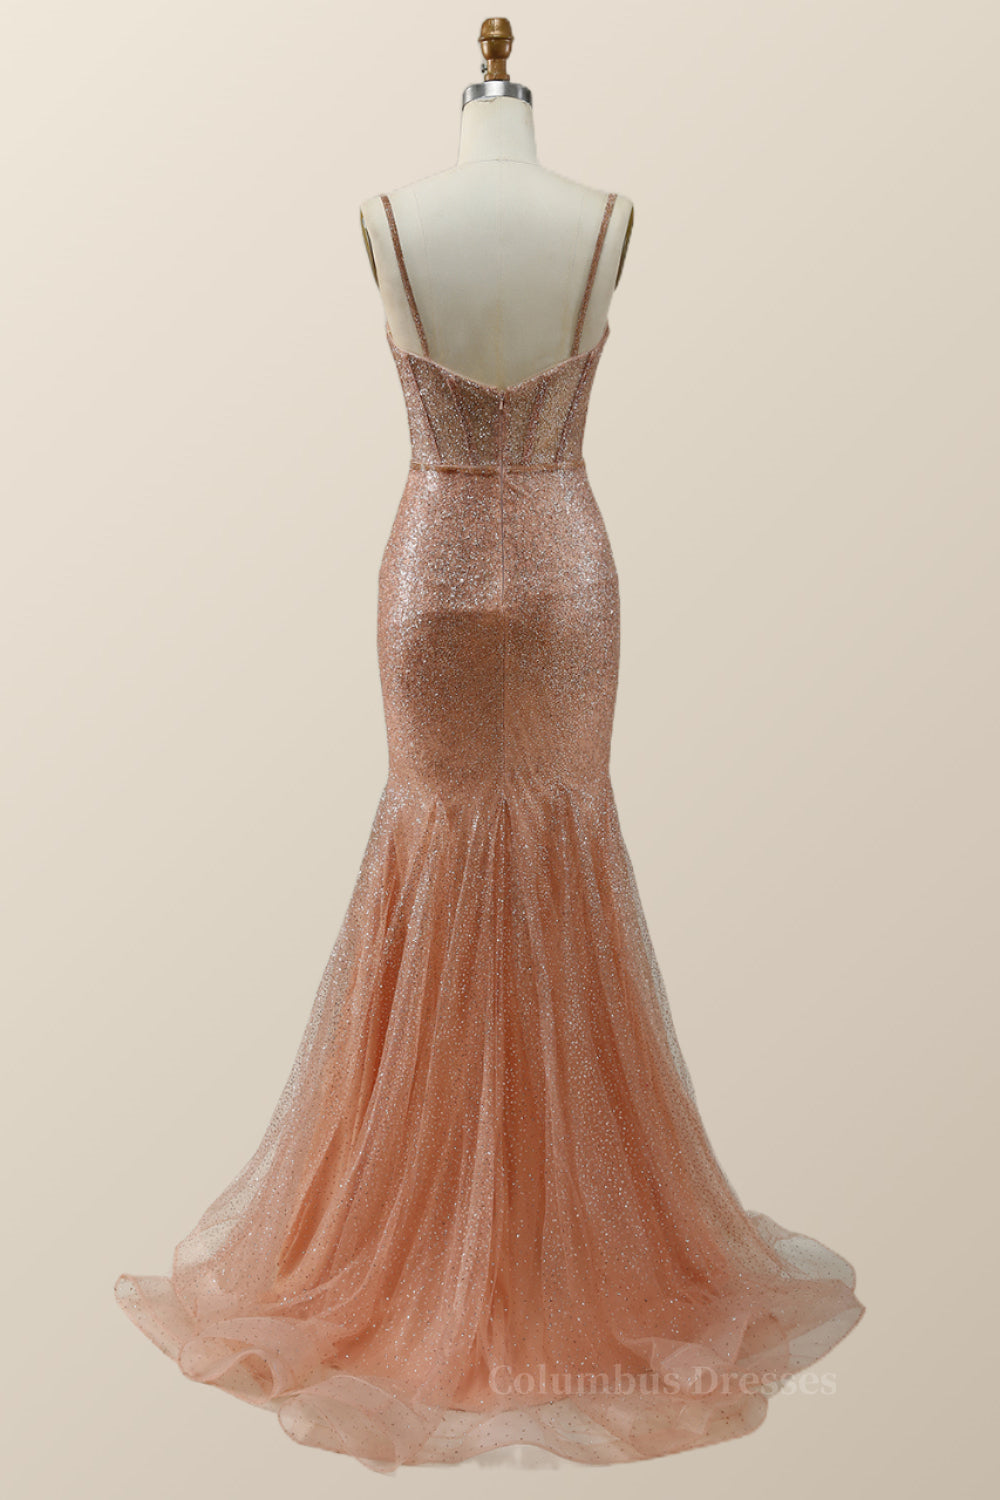 Party Dresses For Christmas Party, Rose Gold Shimmer Mermaid Long Formal Dress